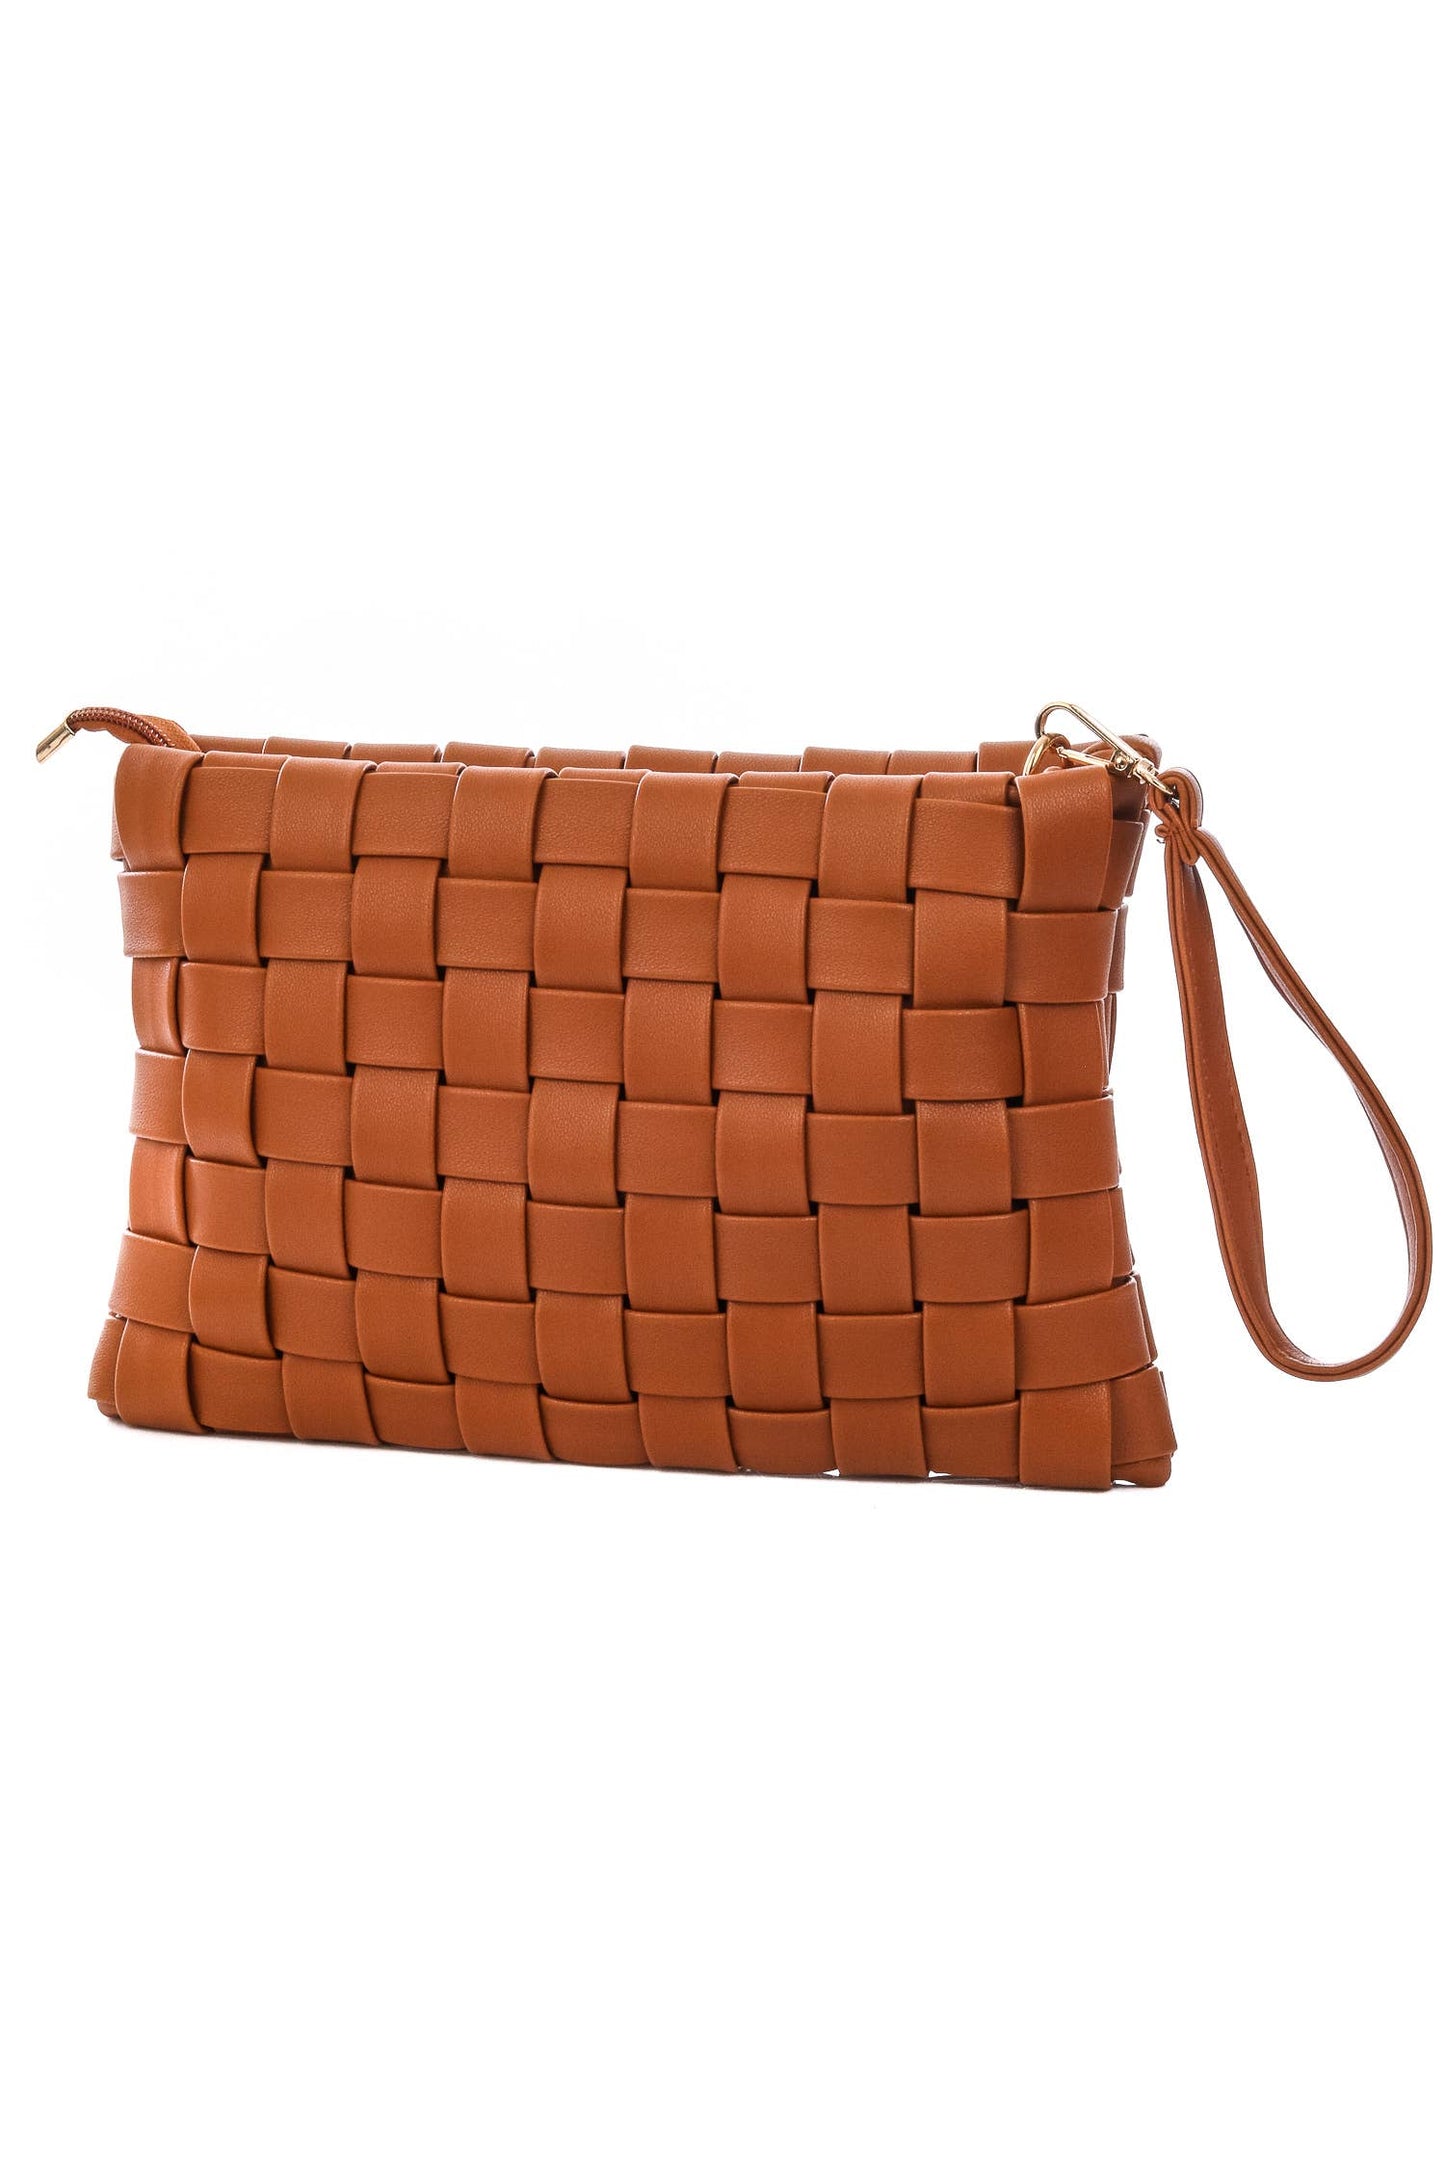 Complete your look with this elegant brown leather woven clutch bag.